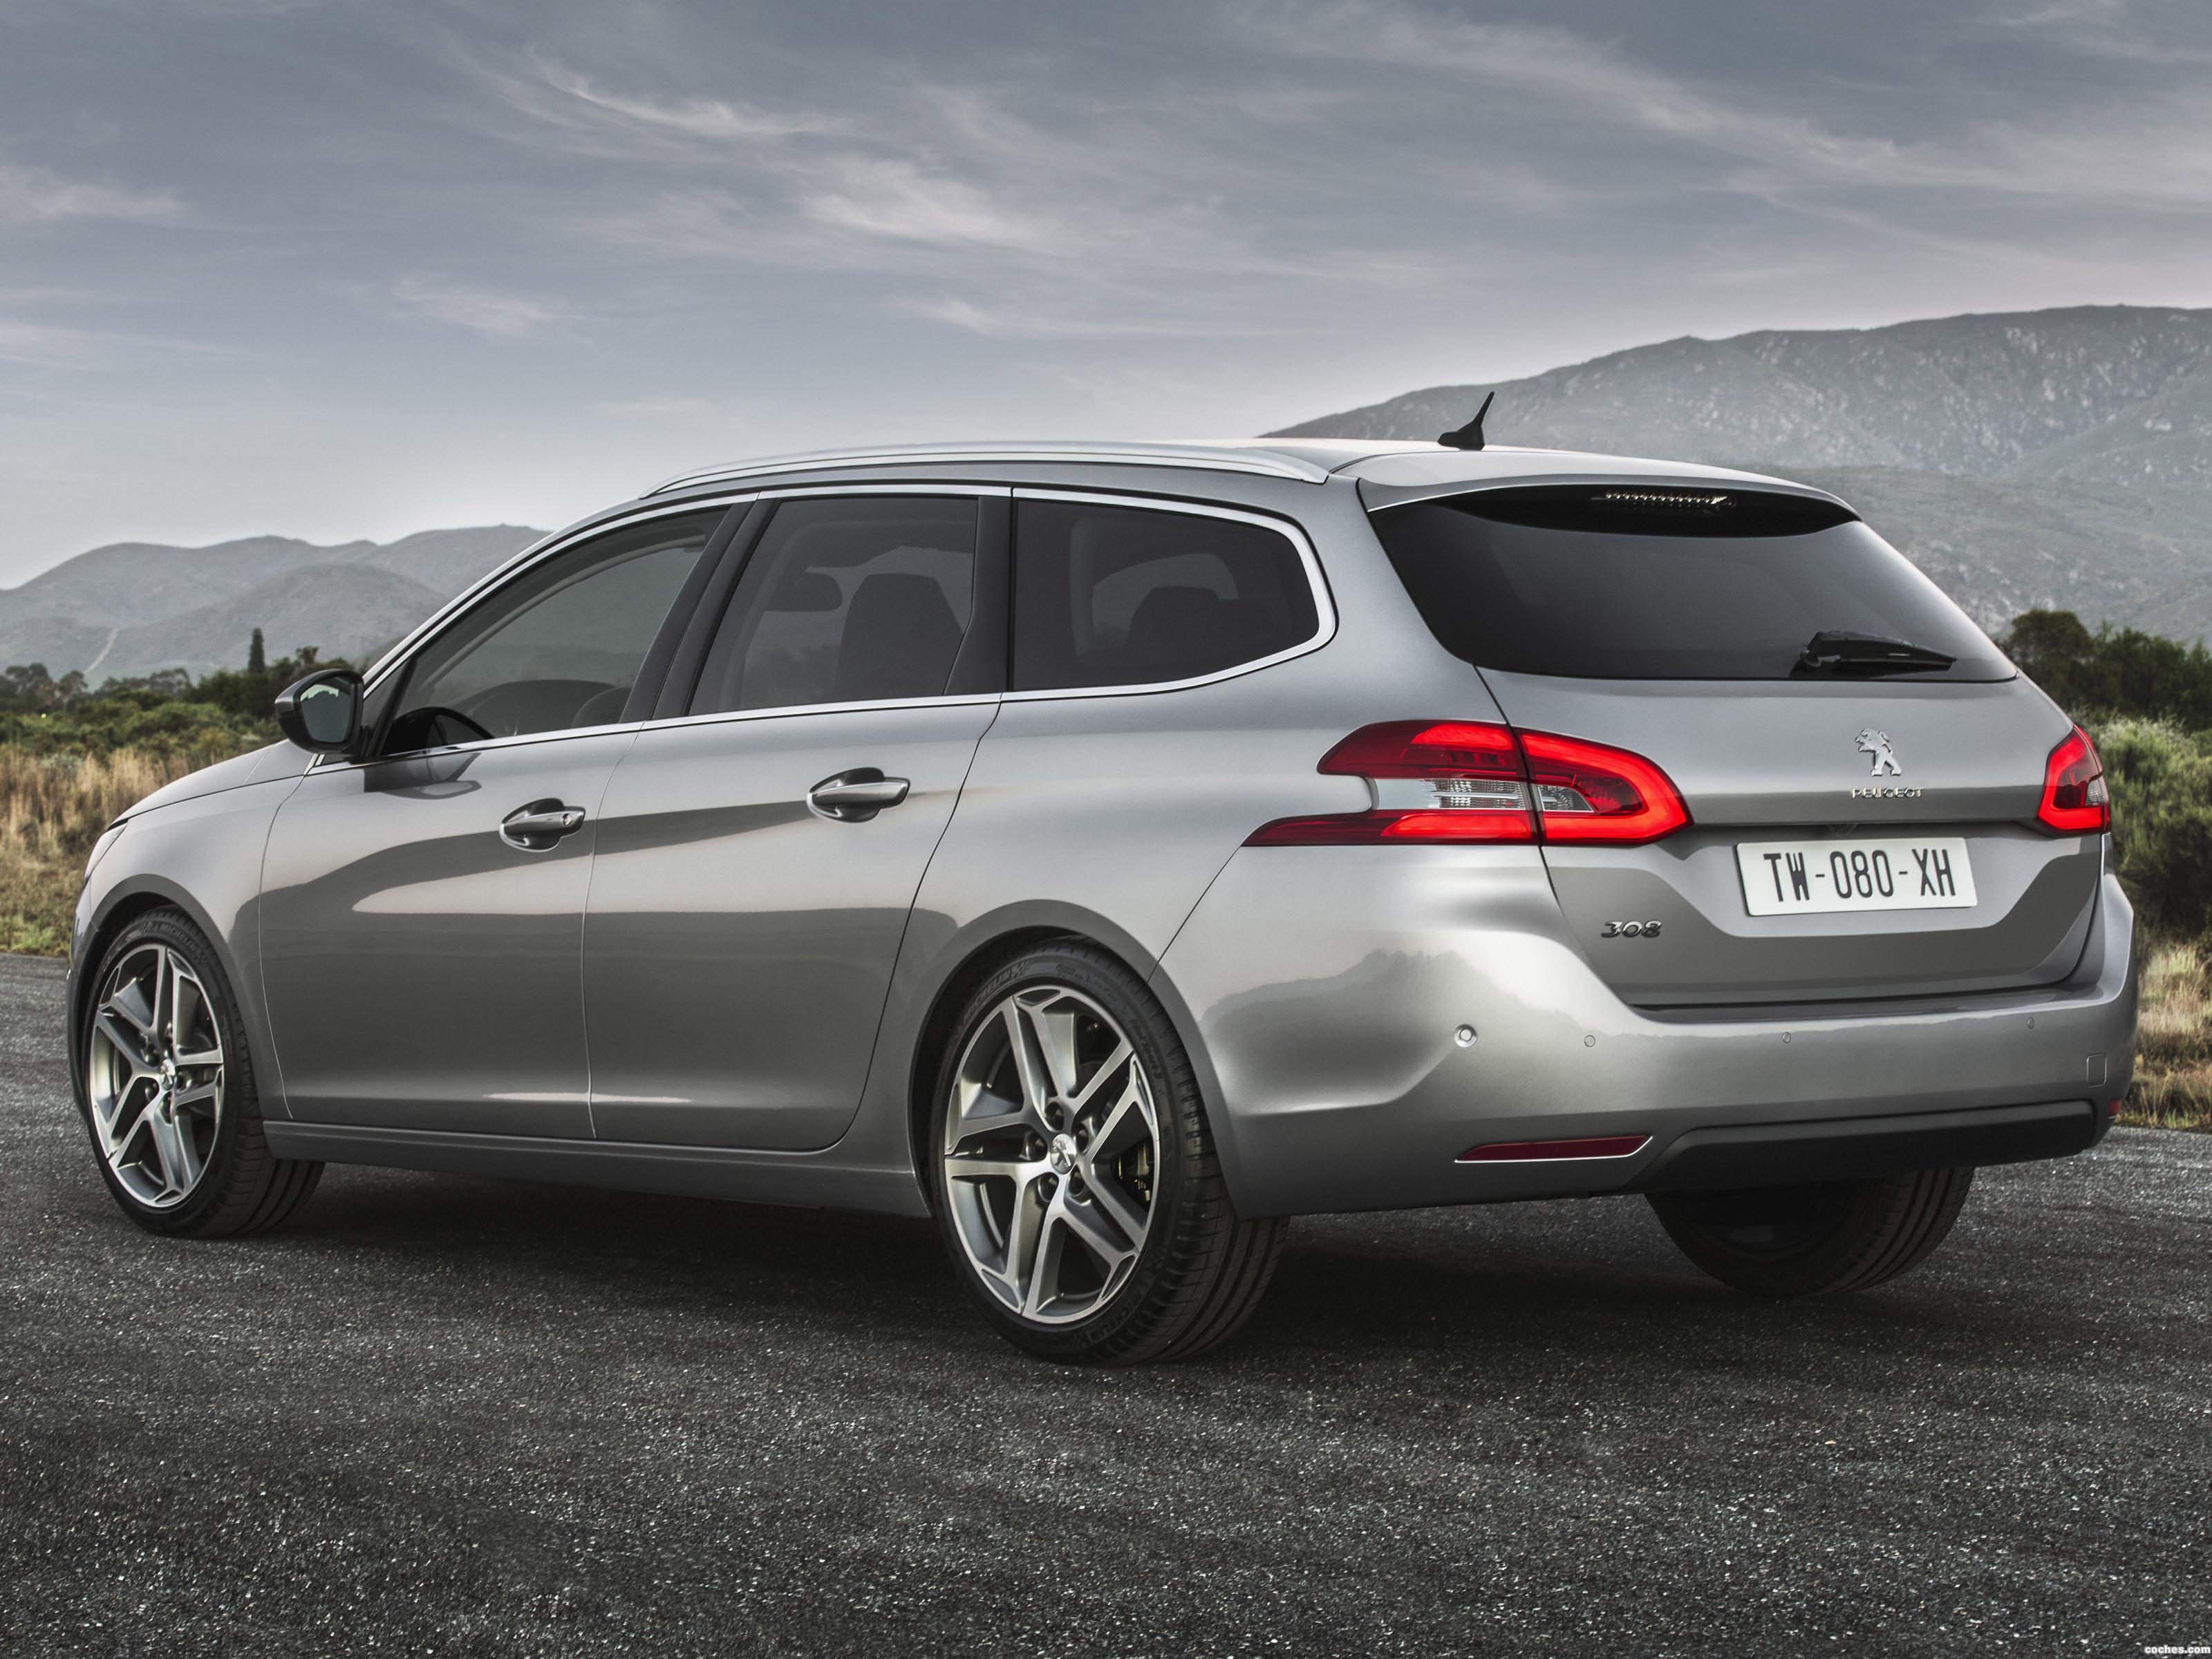 Peugeot 308 SW GT interior specifications